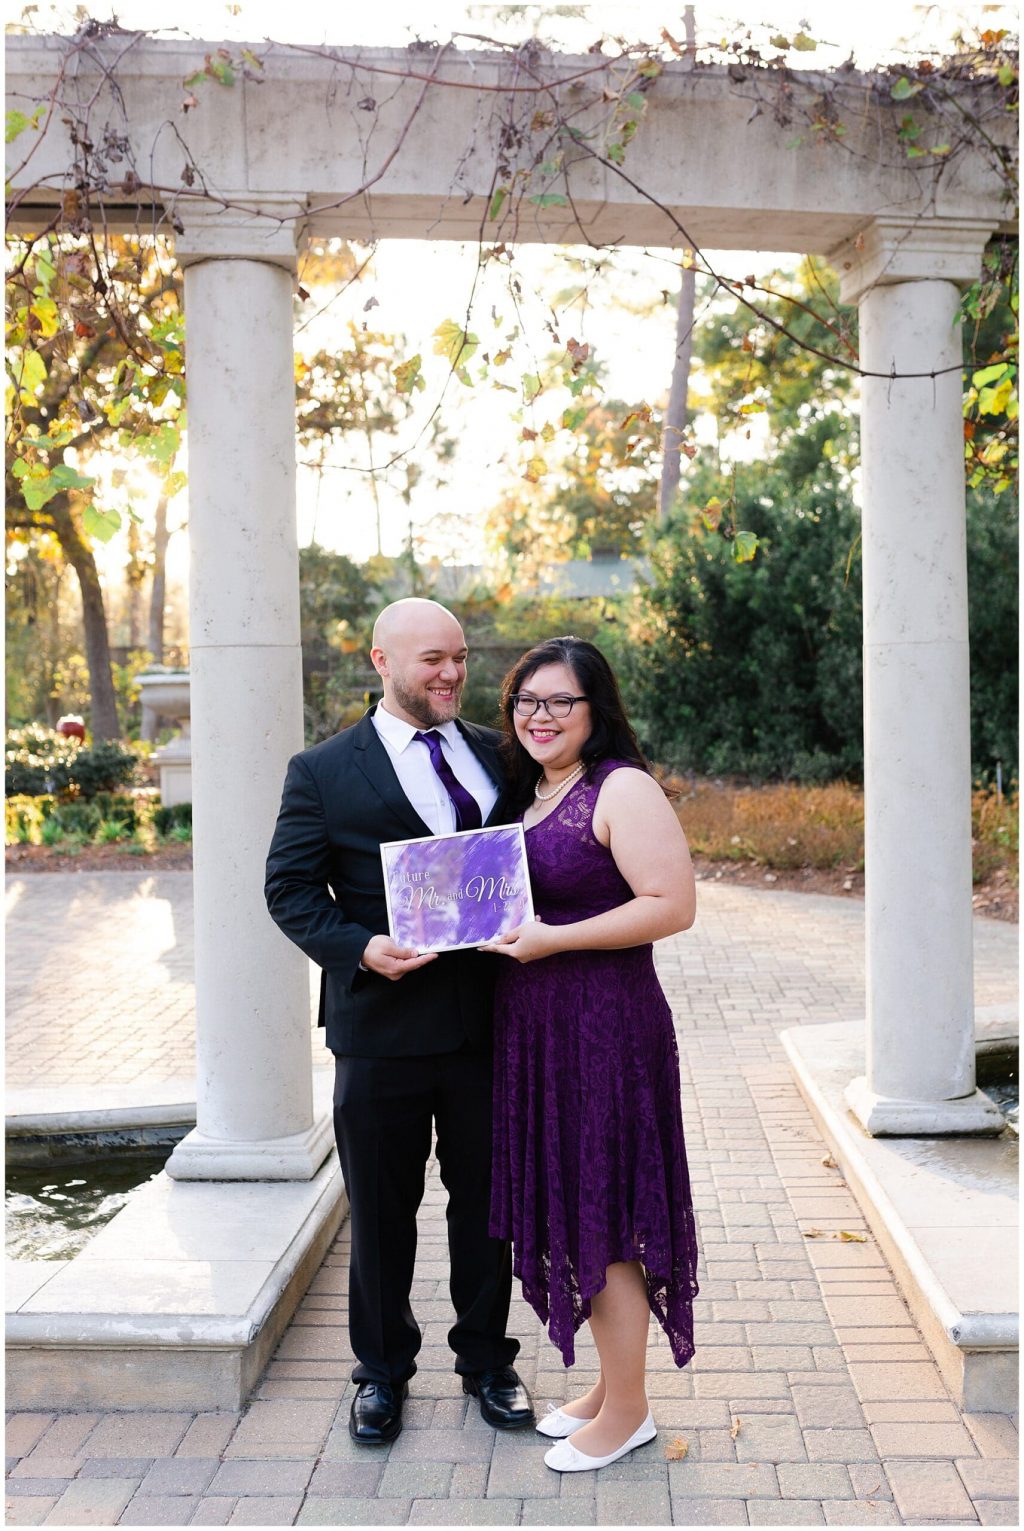 adorable engagement session at Mercer Botanic Gardens in Houston TX photographed by Swish and Click Photography